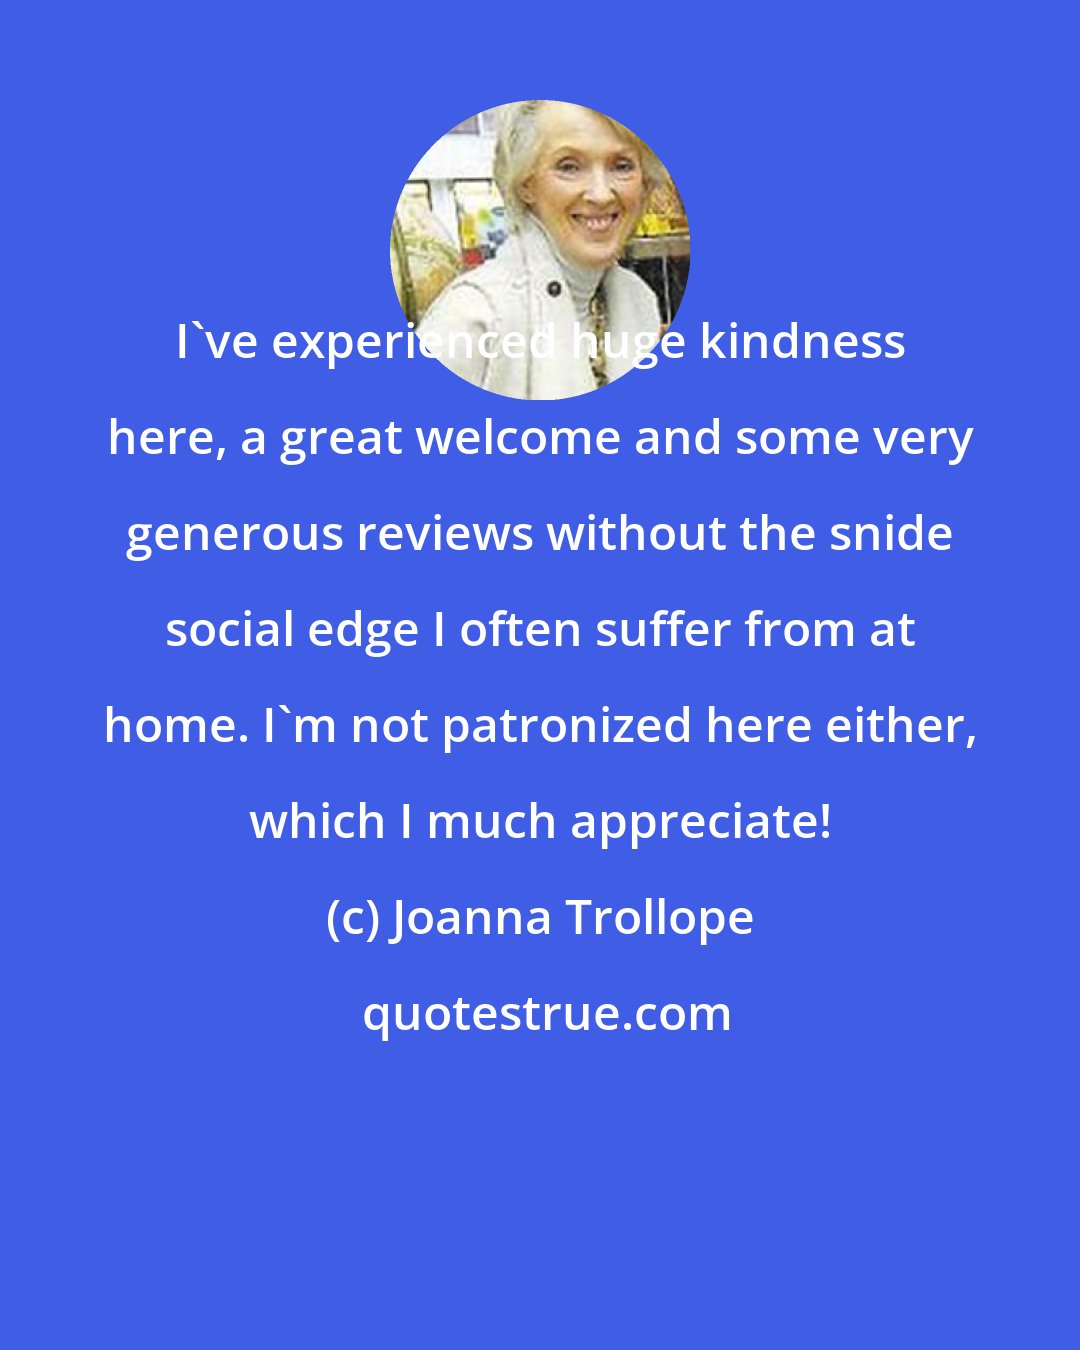 Joanna Trollope: I've experienced huge kindness here, a great welcome and some very generous reviews without the snide social edge I often suffer from at home. I'm not patronized here either, which I much appreciate!